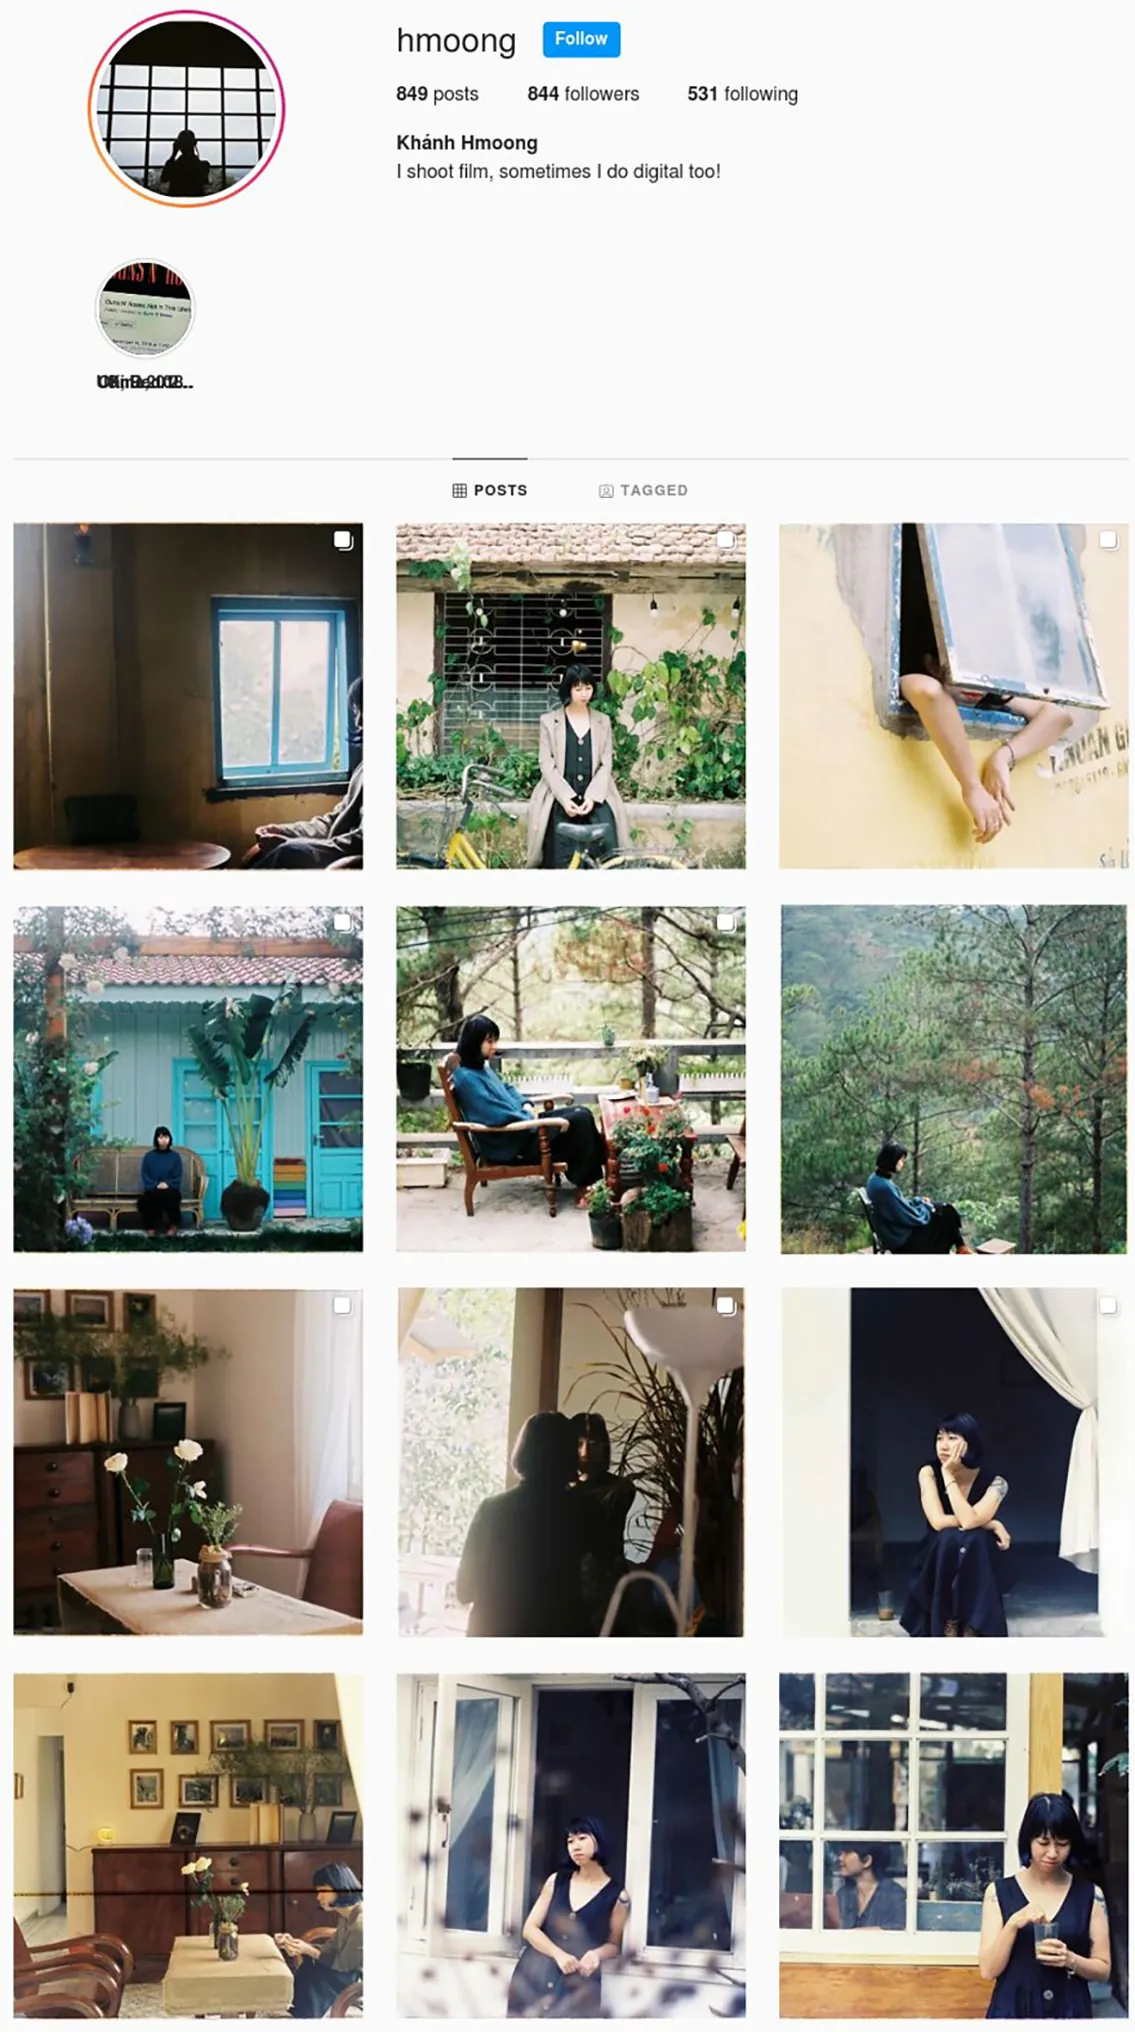 A screenshot of an Instagram profile page for the user hmoong shows thumbnails of 12 photographs, many of them apparent self-portraits, below basic profile information.